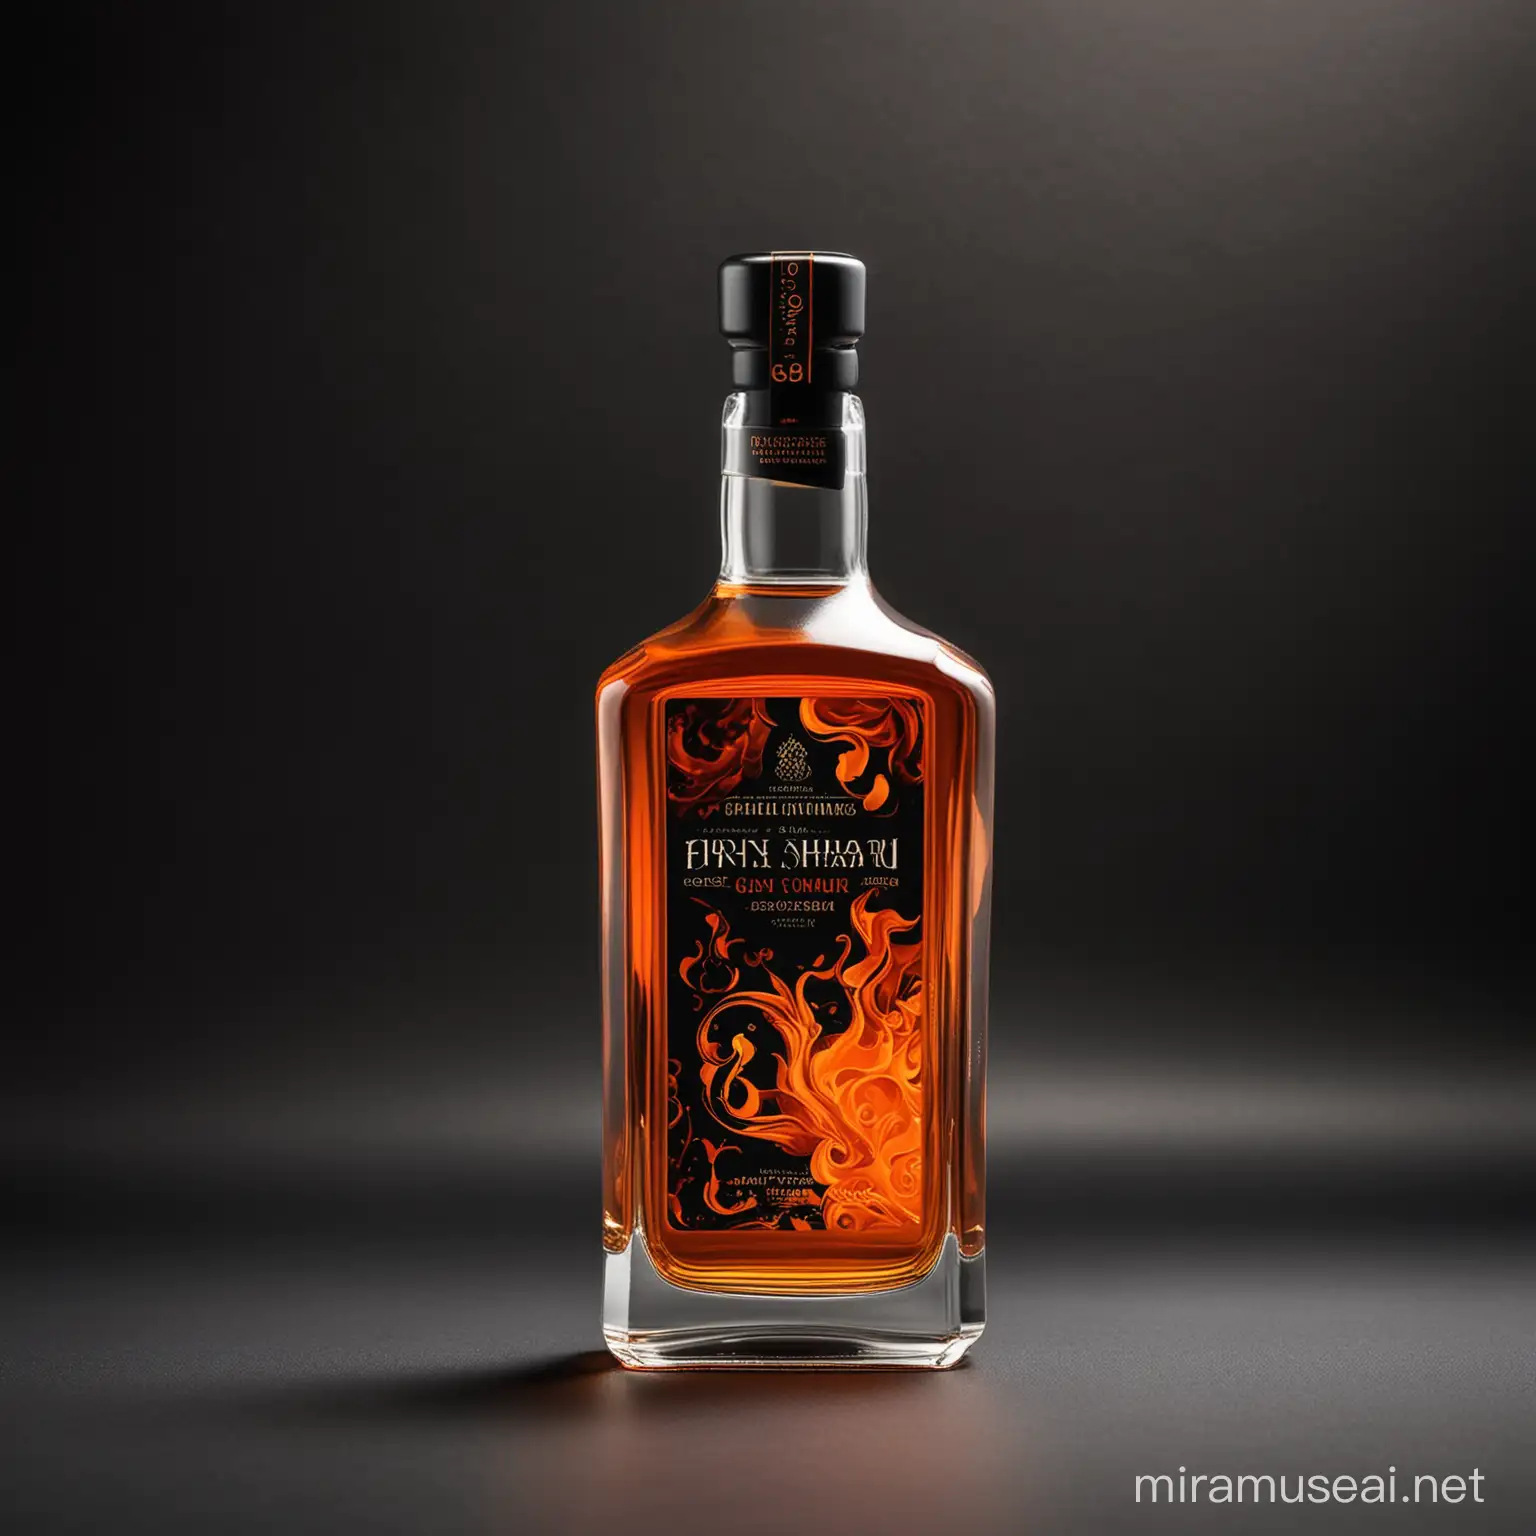 Modern party liquor packaging design, high end liquor, 500 ml glass bottle, photograph images, high details, flame orange and black texture, brand name is Octano,  label flame shape